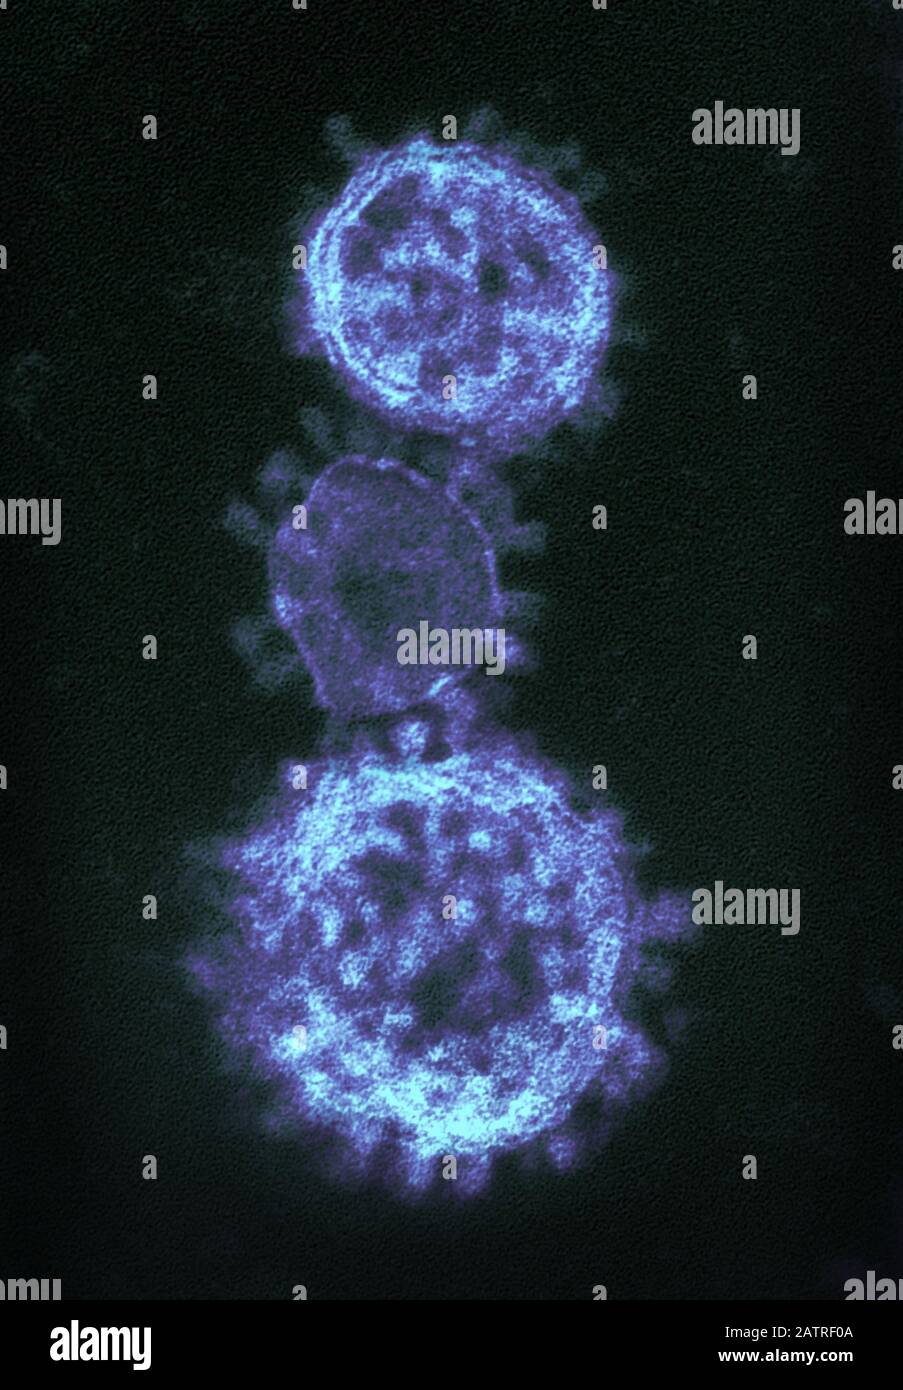 Highly magnified, digitally colorized transmission electron microscopic (TEM) image showing ultrastructural details exhibited by three, spherical shaped, Middle East respiratory syndrome coronavirus (MERS-CoV) virions, 2014. MERs is in the same family as the novel coronavirus which began to infect patients in Wuhan, China in early 2020. Courtesy National Institute of Allergy and Infectious Diseases (NIAID)/CDC. Image produced in 2014. () Stock Photo